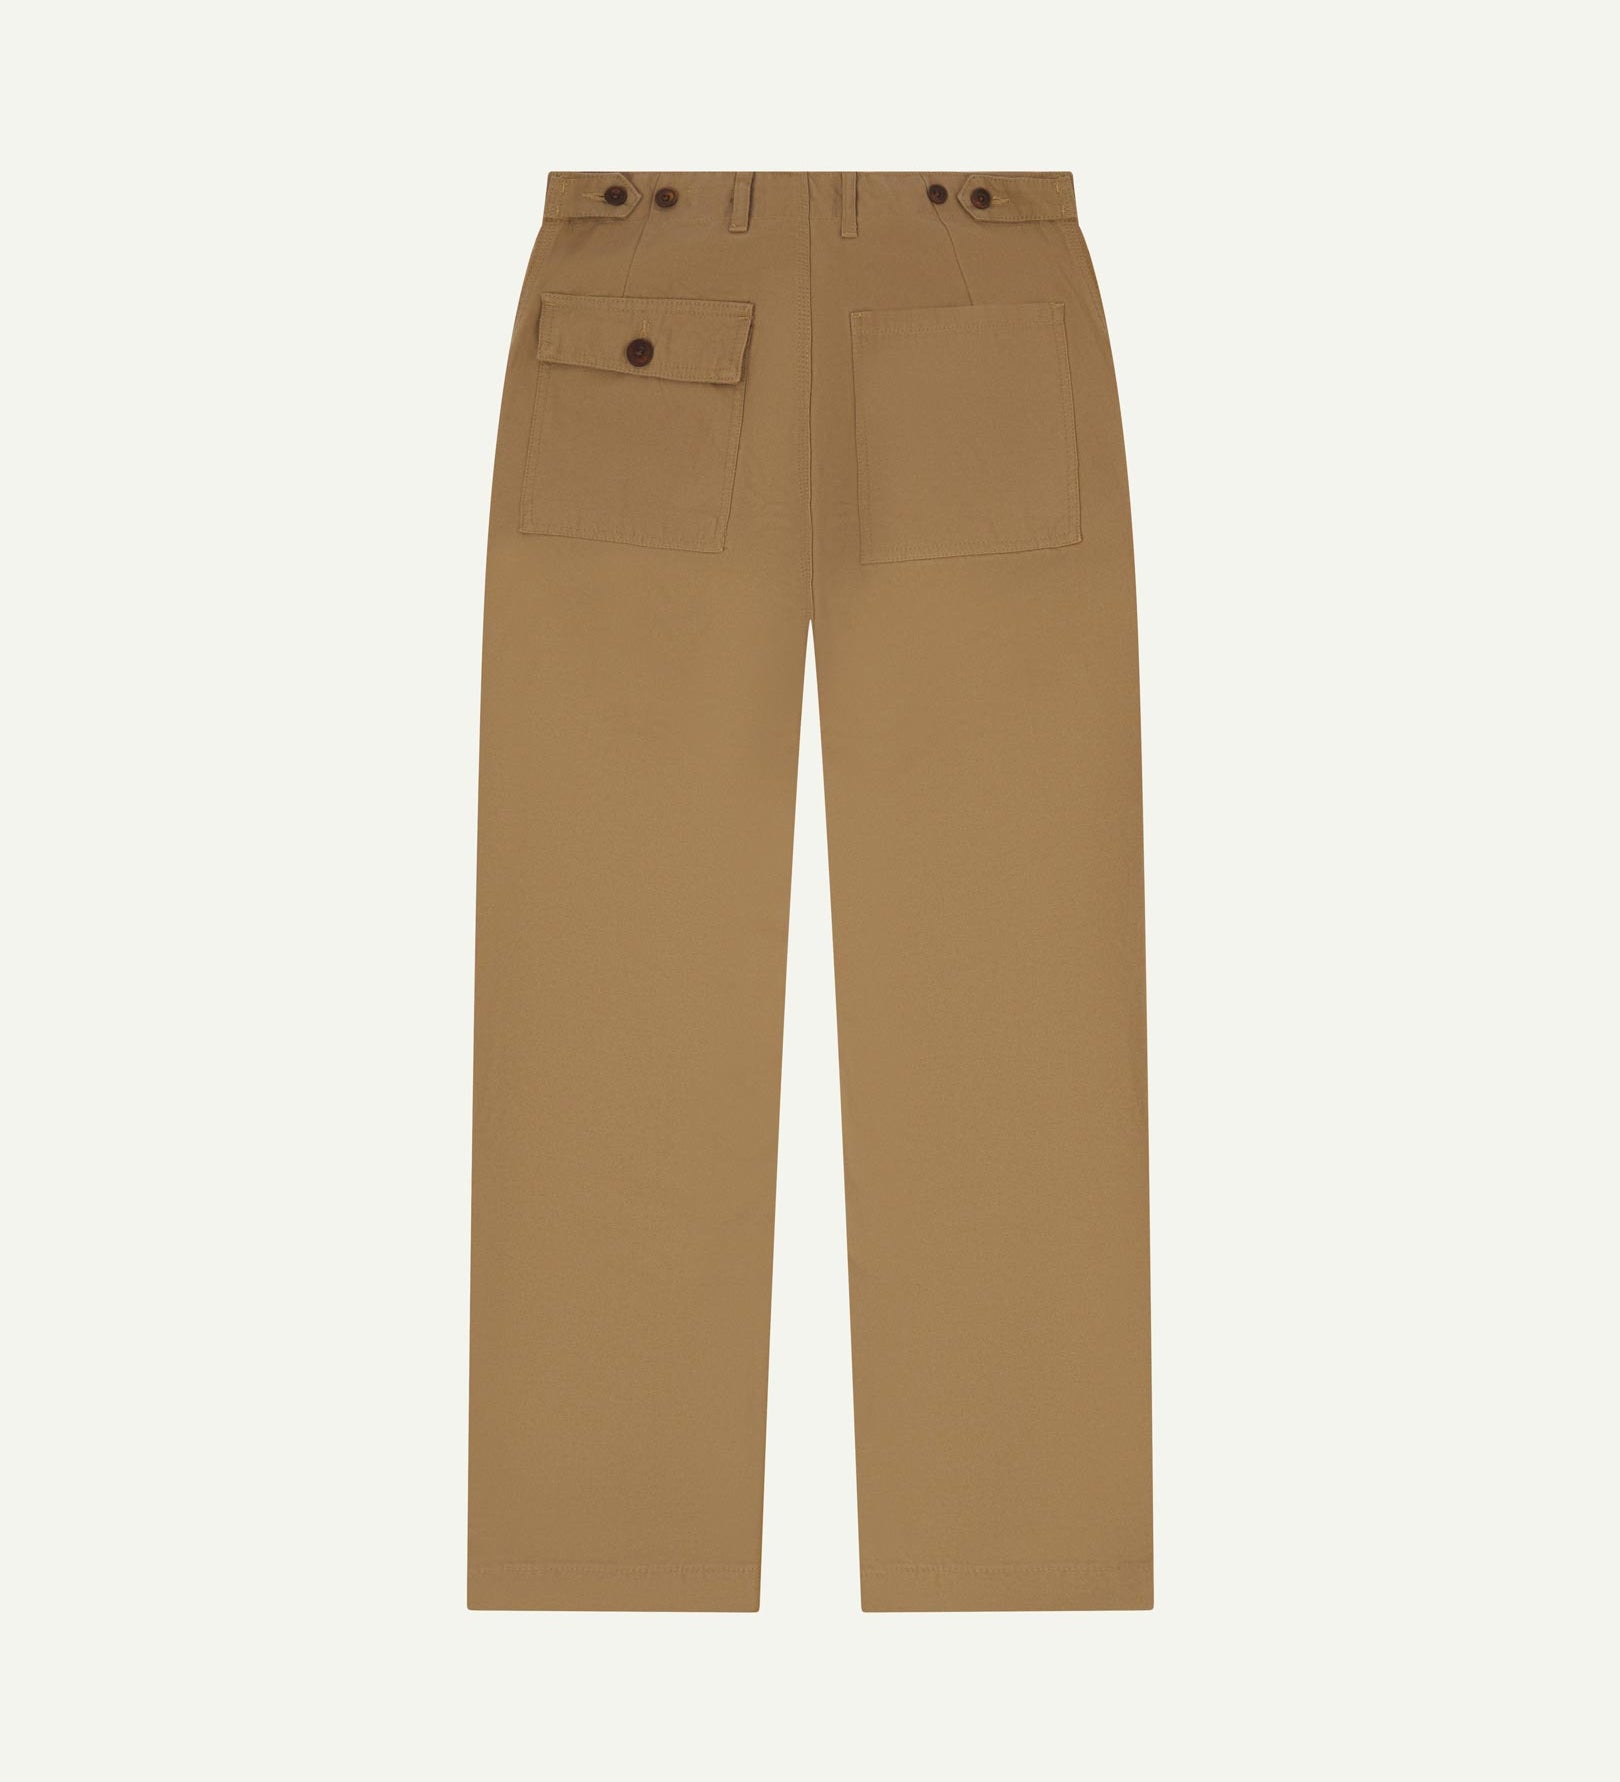 Full length back-view of khaki cotton 5005 trousers with view of rear pockets, belt loops and tapered leg fit.